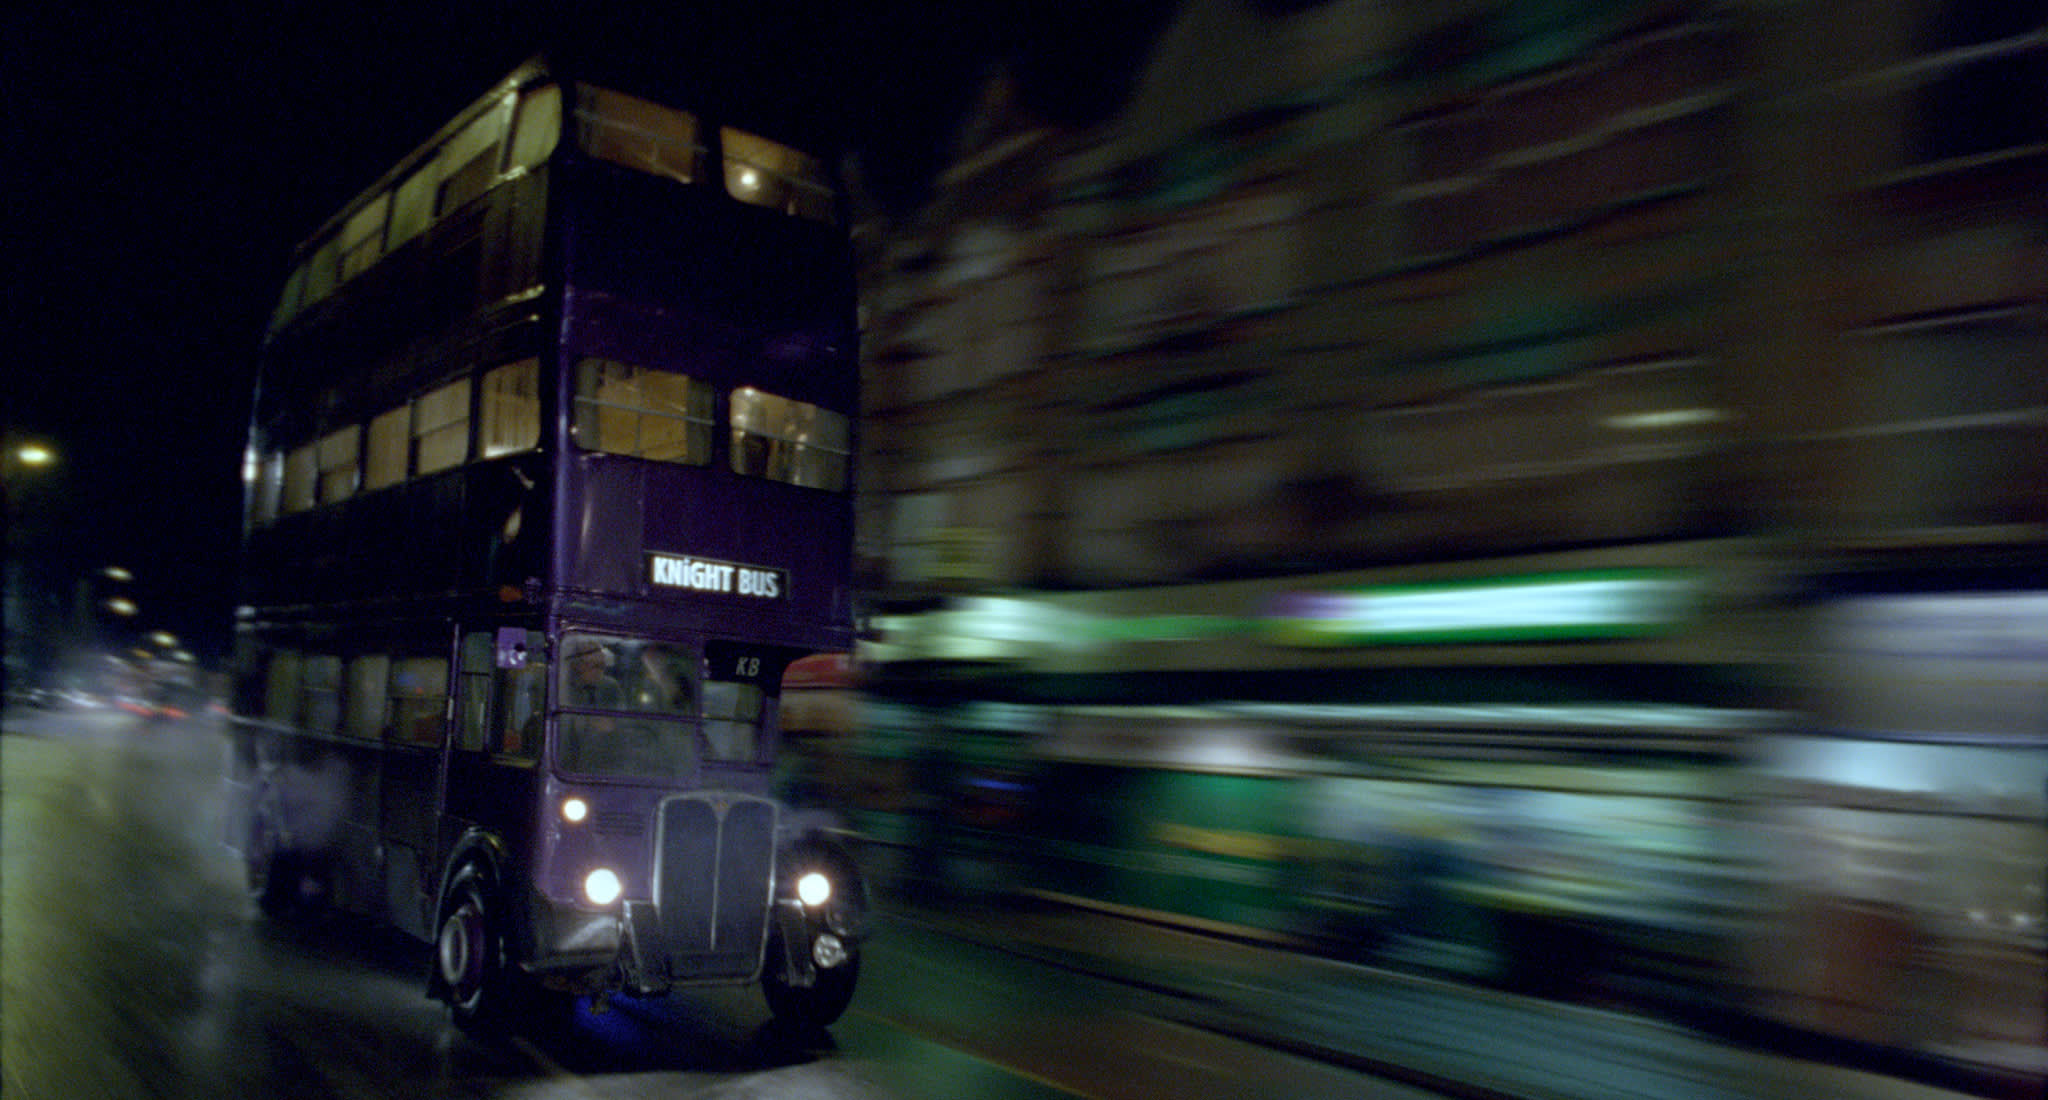 The Knight Bus being driven at speed at night.